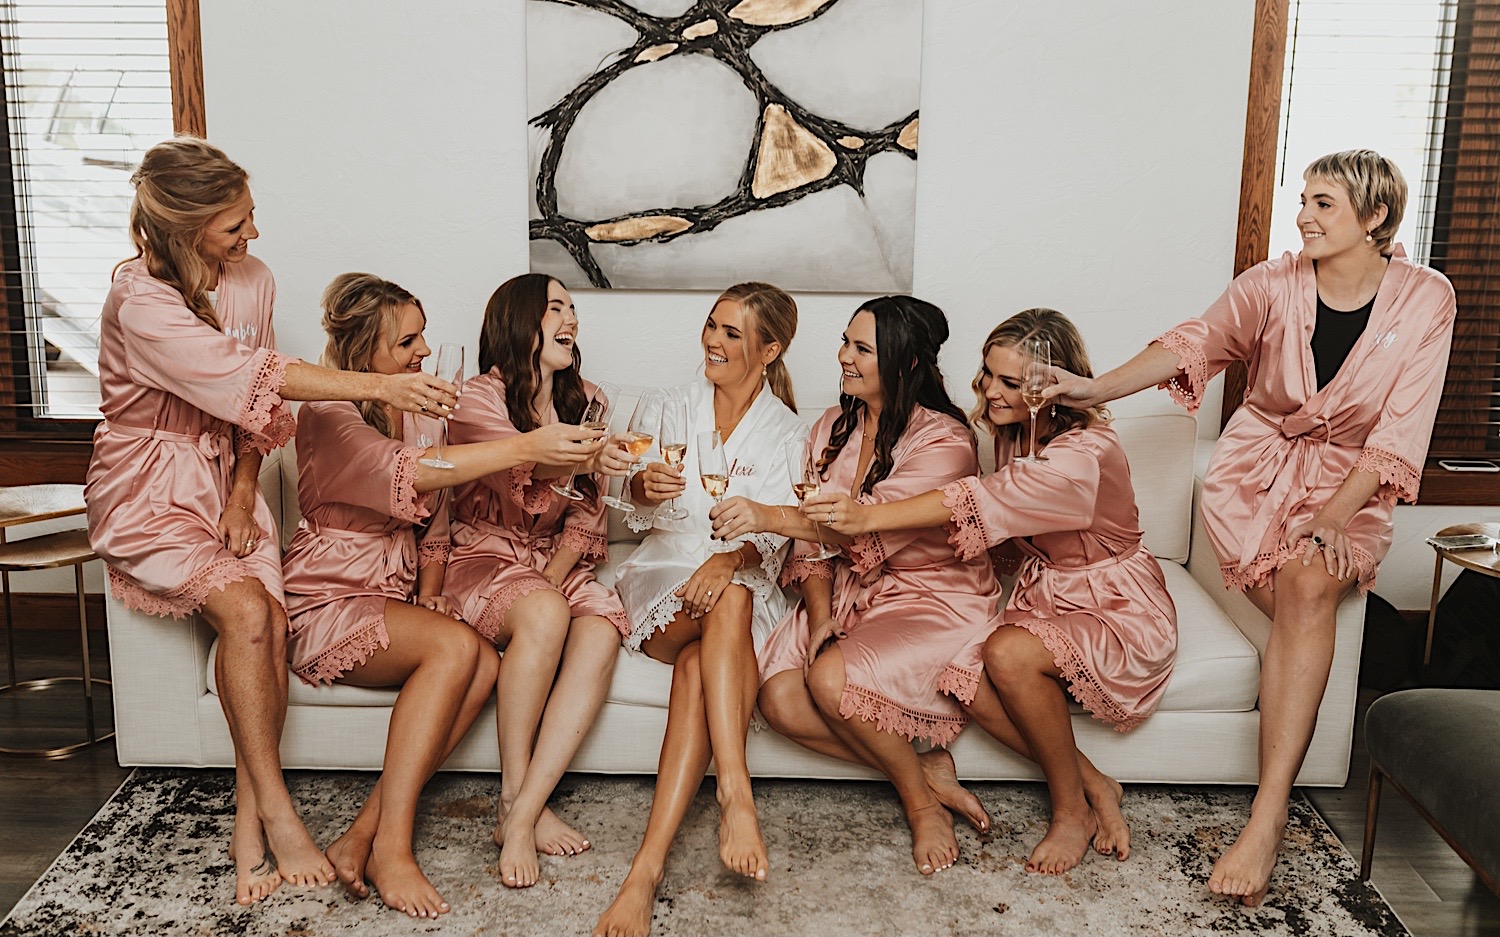 A bride and her bridesmaids sit on a couch and drink champagne with one another before their wedding day